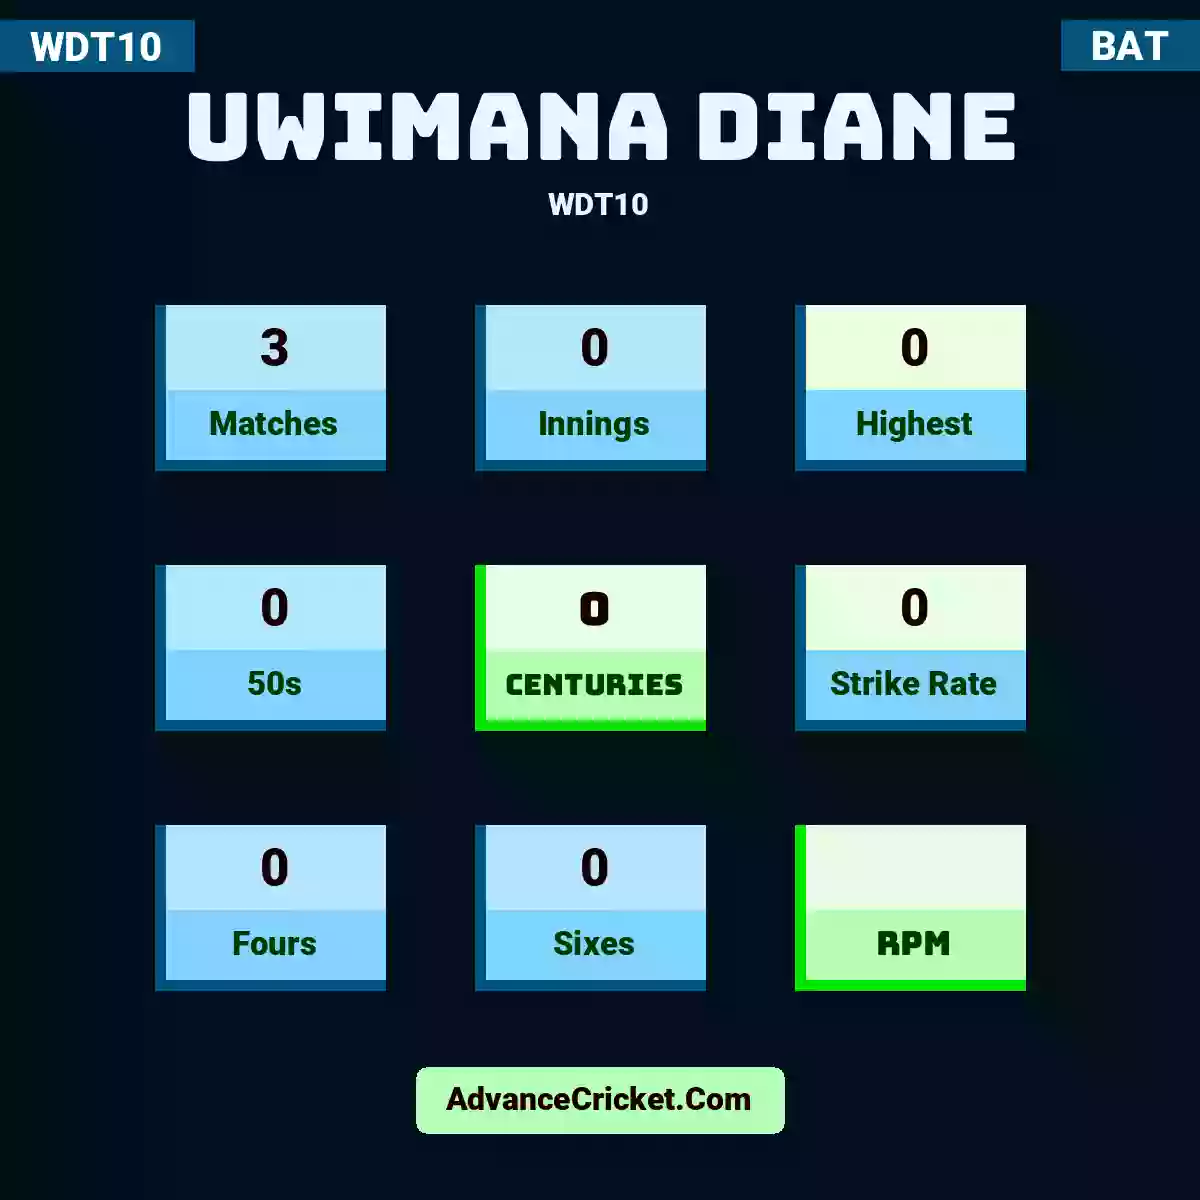 Uwimana Diane WDT10 , Uwimana Diane played 3 matches, scored 0 runs as highest, 0 half-centuries, and 0 centuries, with a strike rate of 0. U.Diane hit 0 fours and 0 sixes.